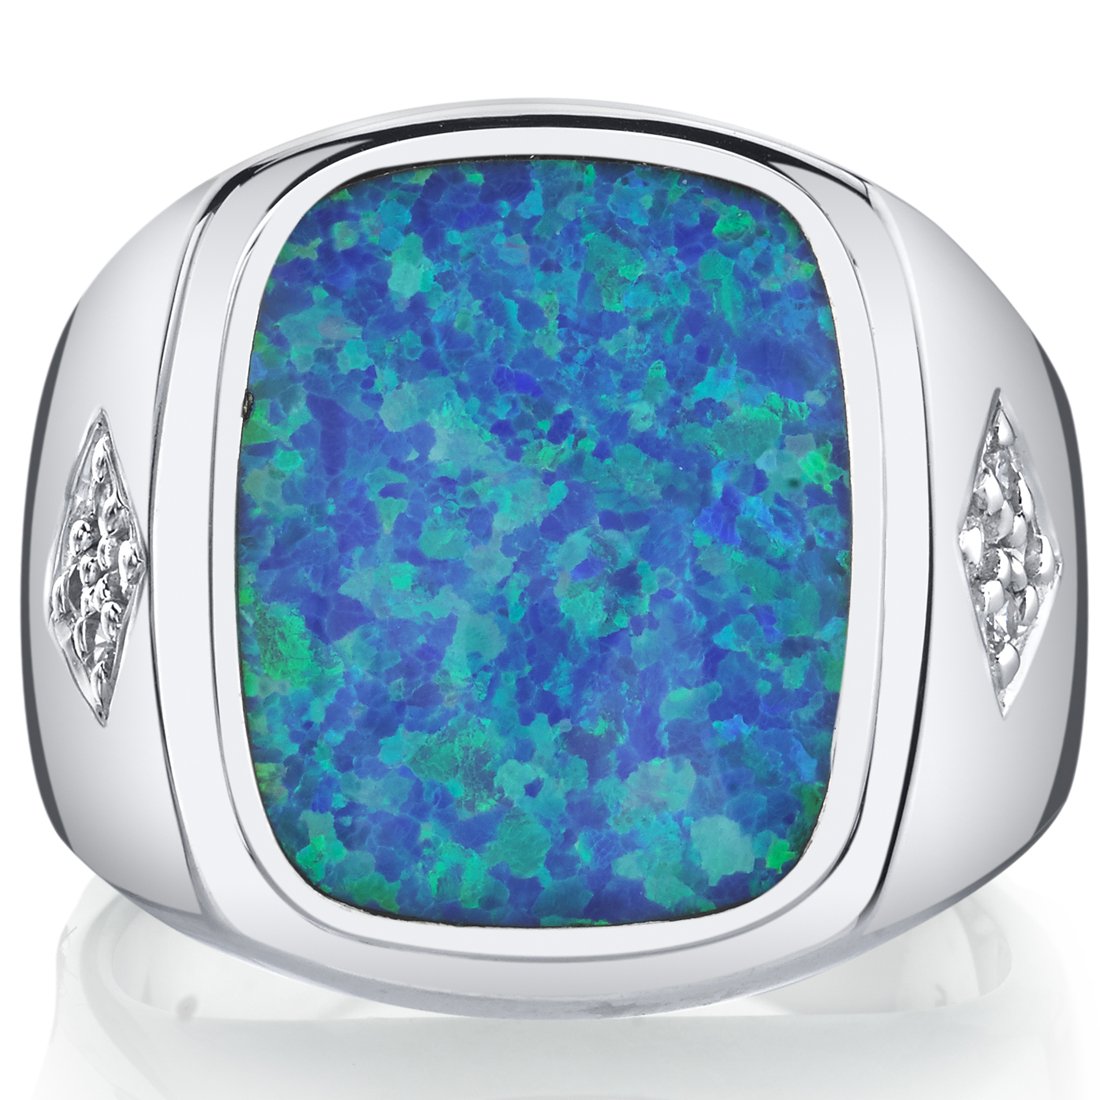 Peora Men's Created Blue Fire Opal Knight Signet Ring 925 Sterling Silver, Large 15x12mm Cushion Cut, Sizes 8 to 13